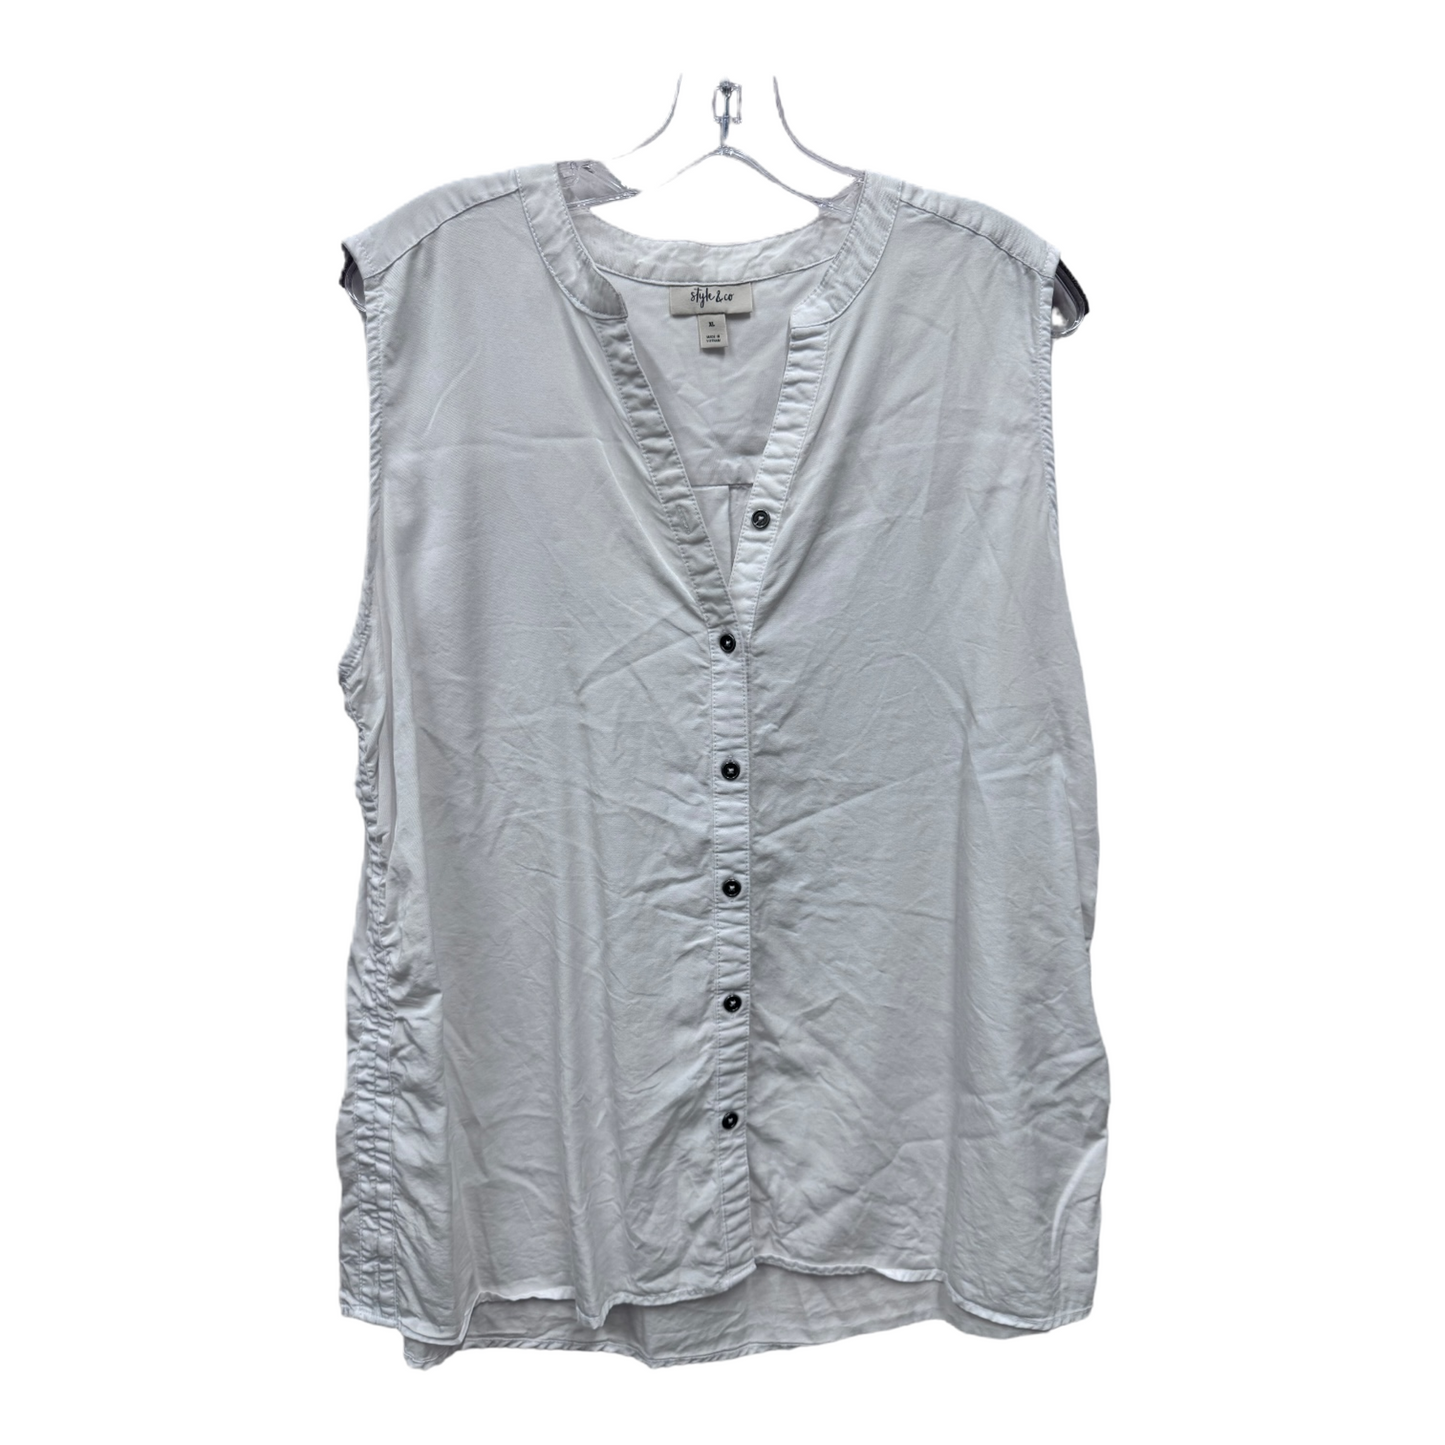 White Top Sleeveless By Style And Company, Size: Xl